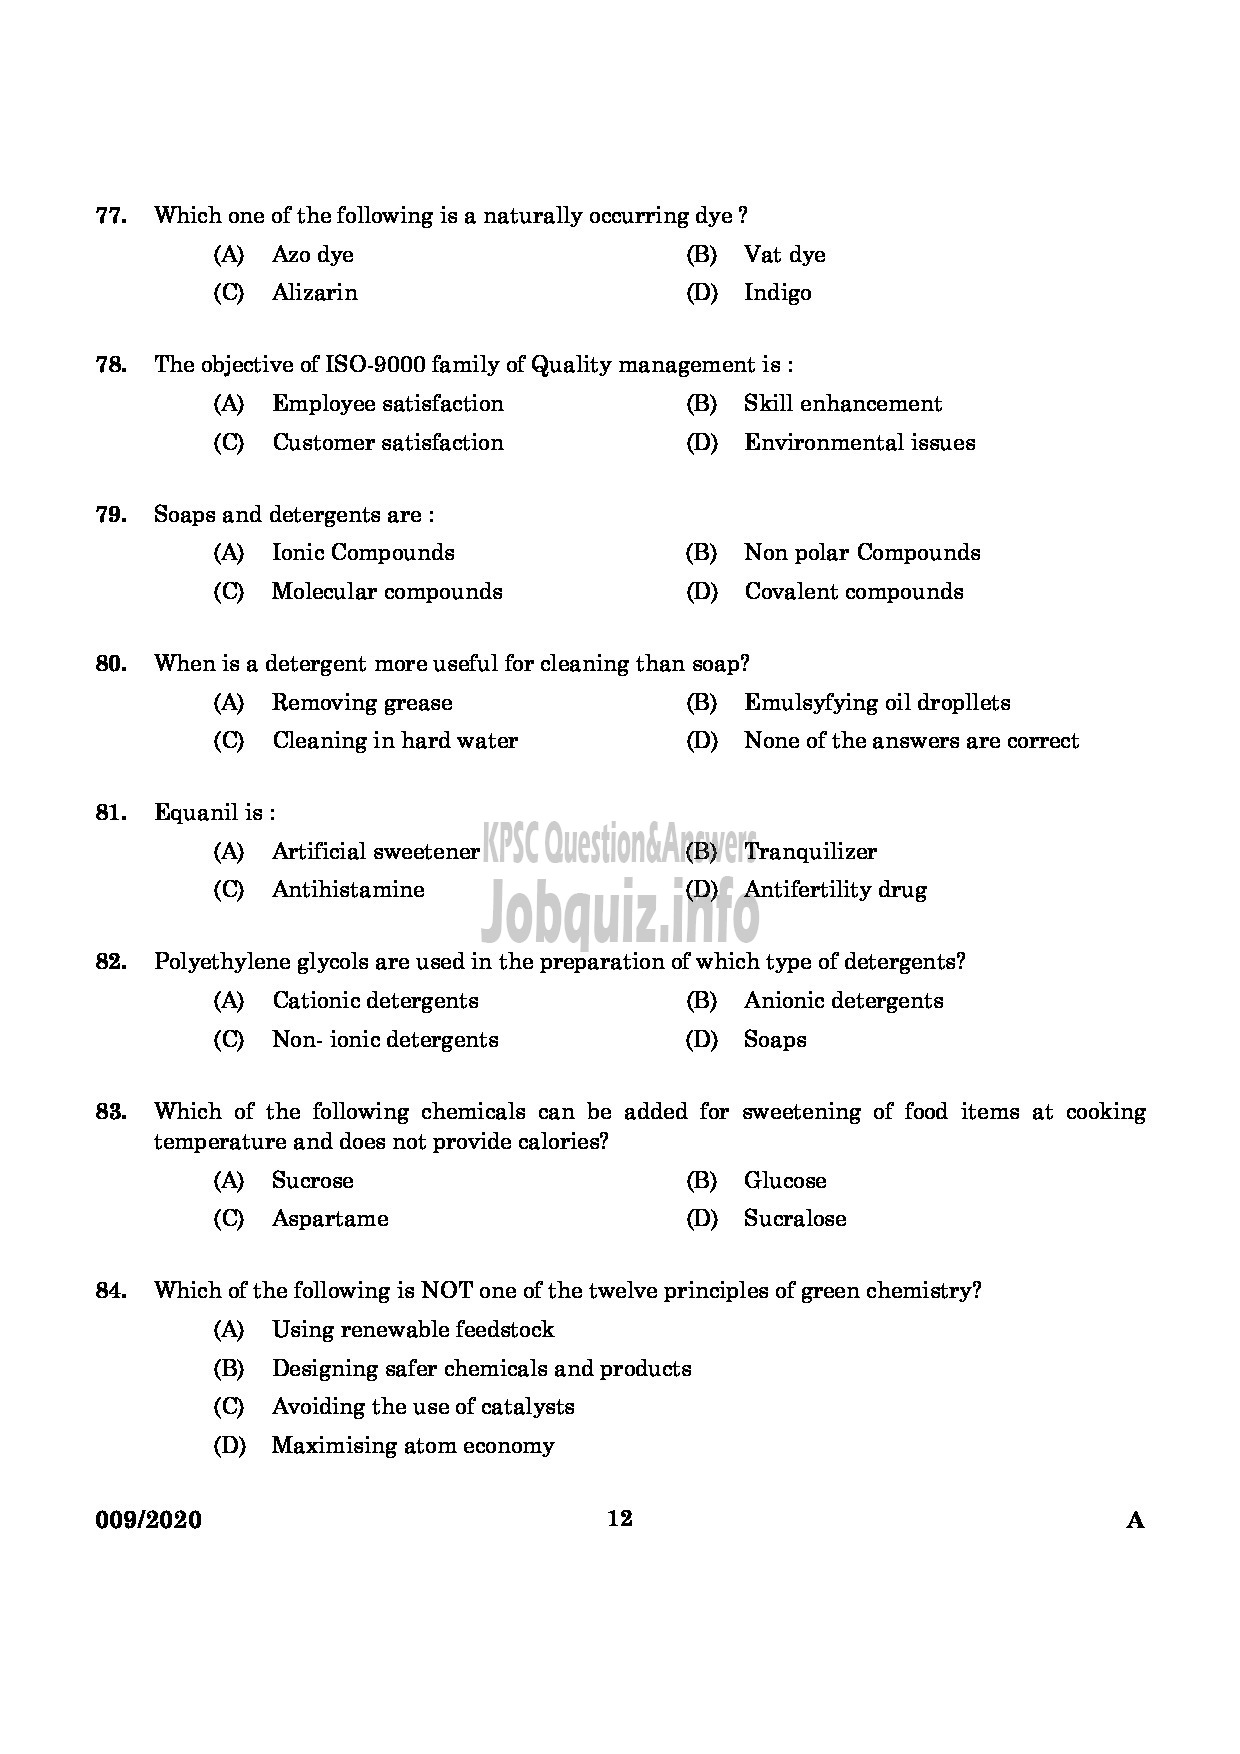 Kerala PSC Question Paper - CHEMIST IN FACTORIES AND BOILERS ENGLISH -10